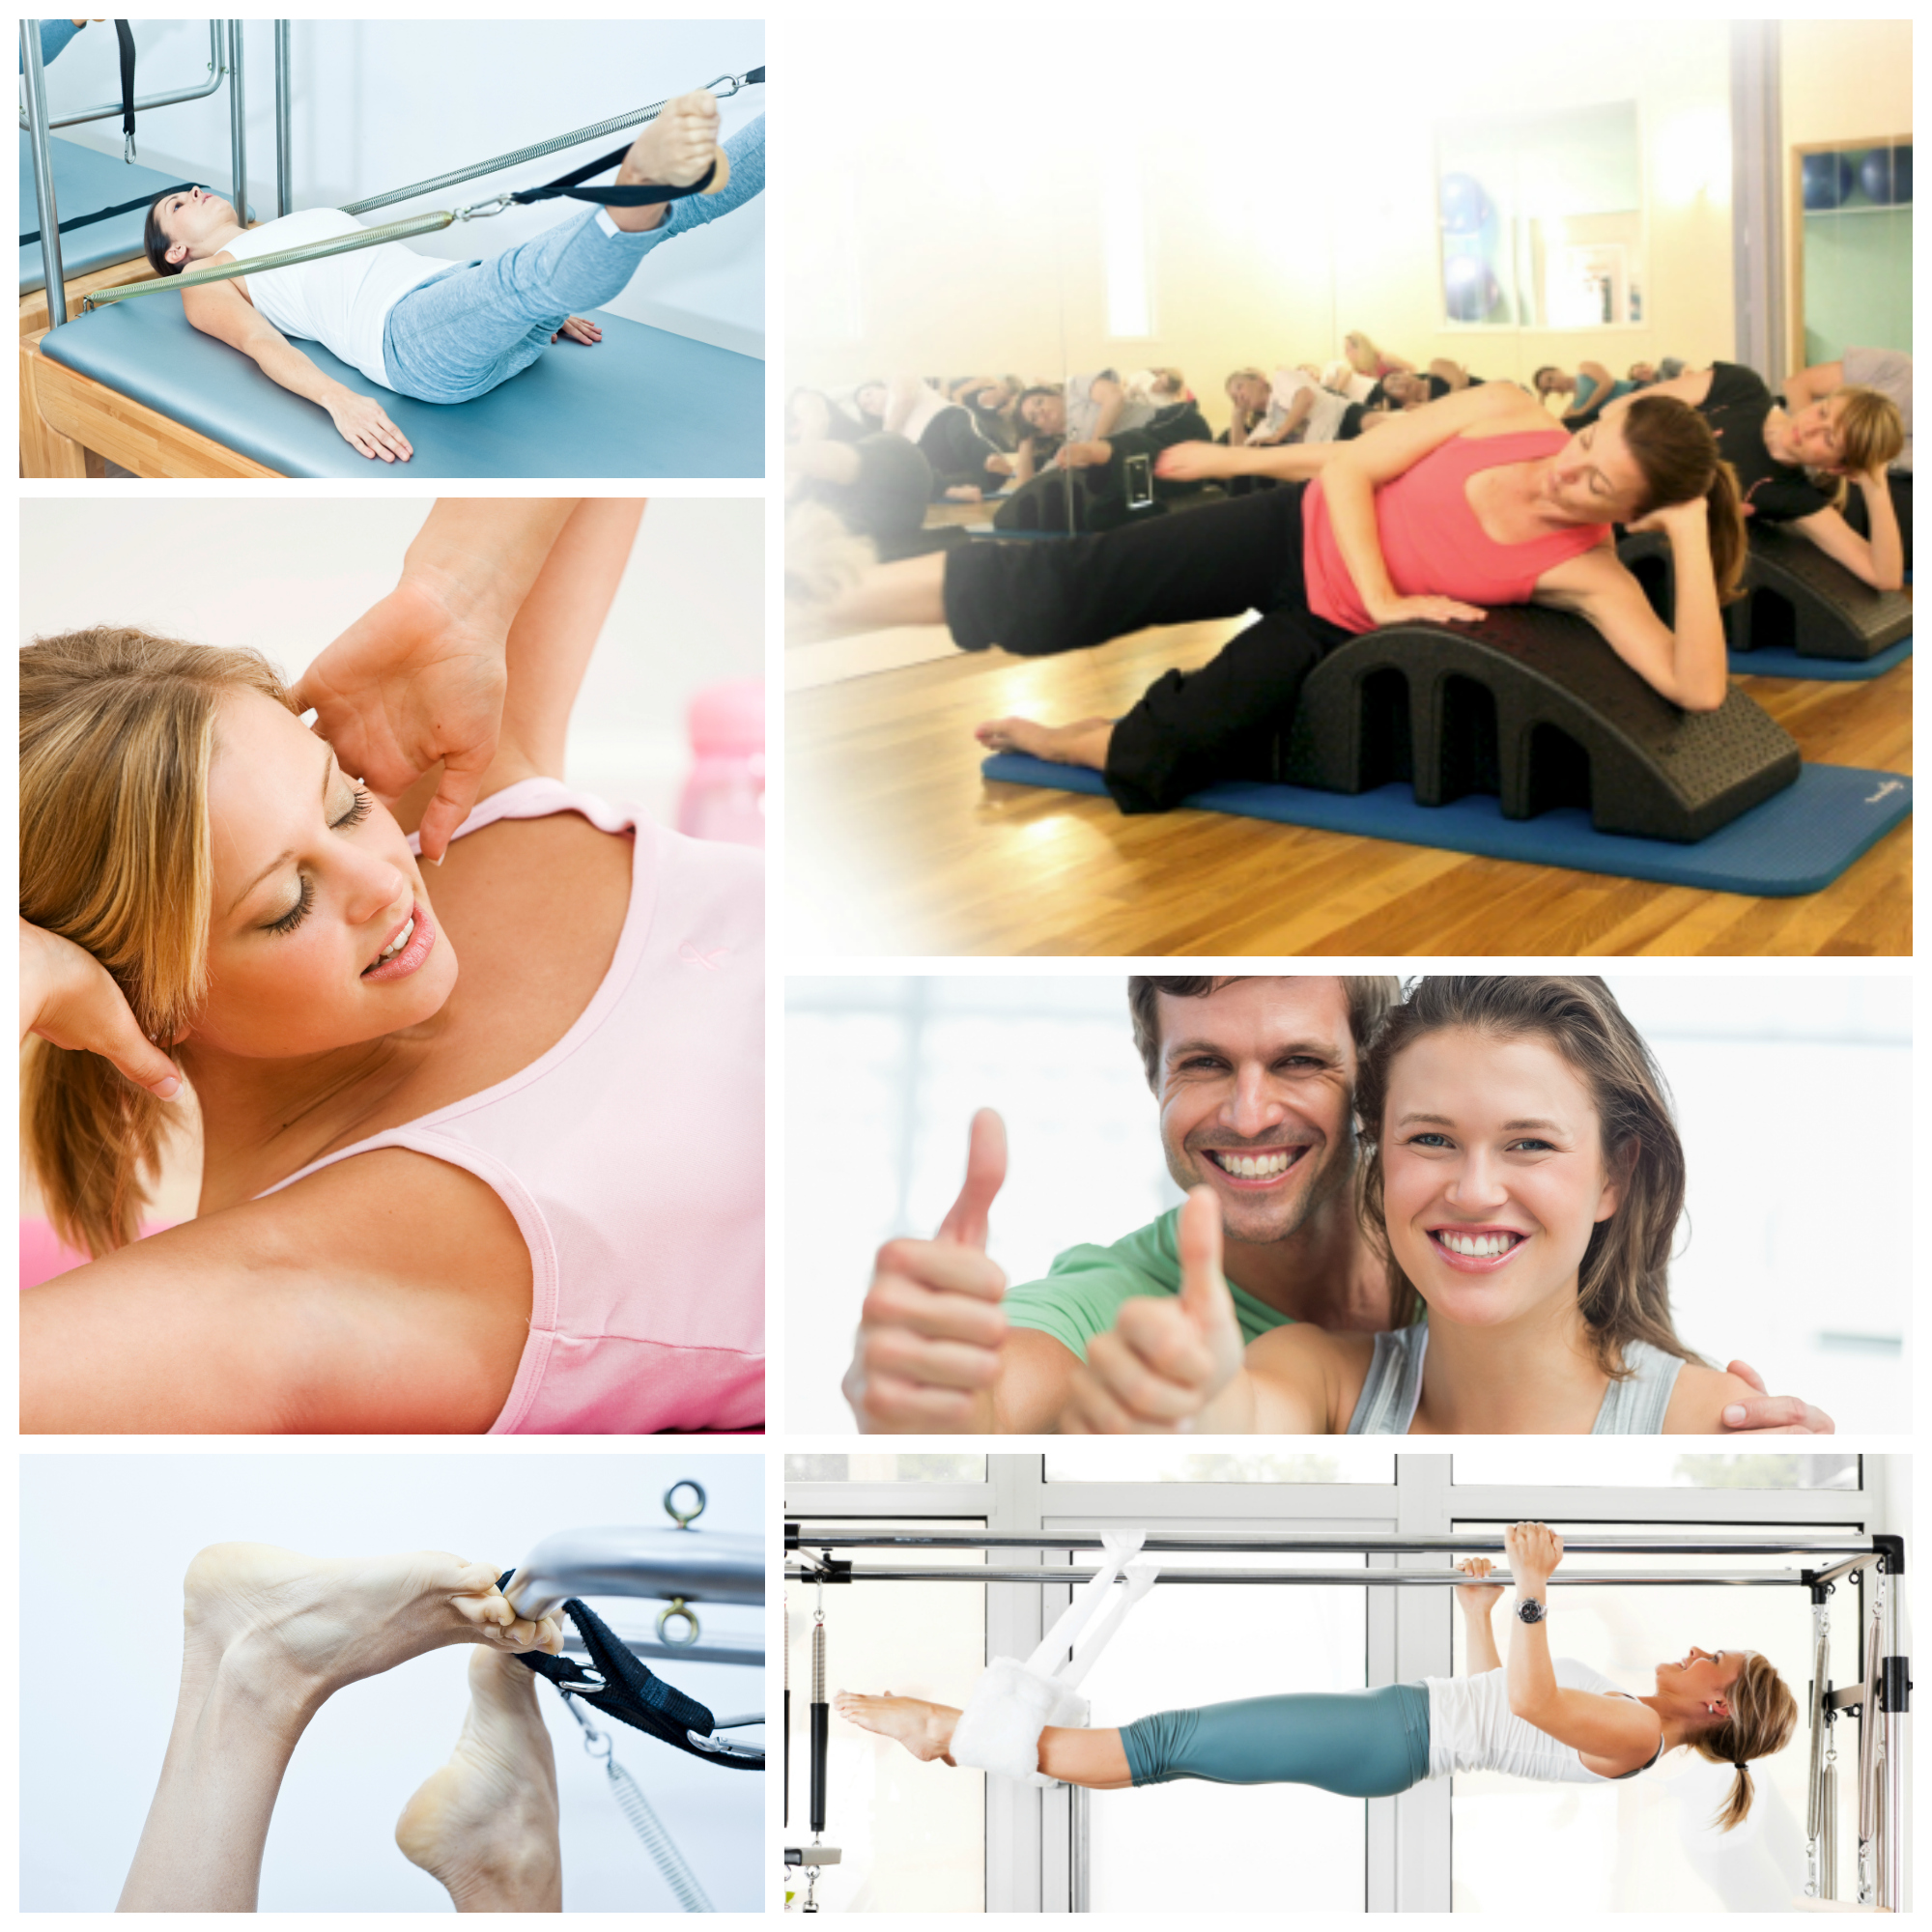 Get The Best Pilates Exercises Into Your Workouts To Maximize the Whole-Body Health Benefits of the Pilates System